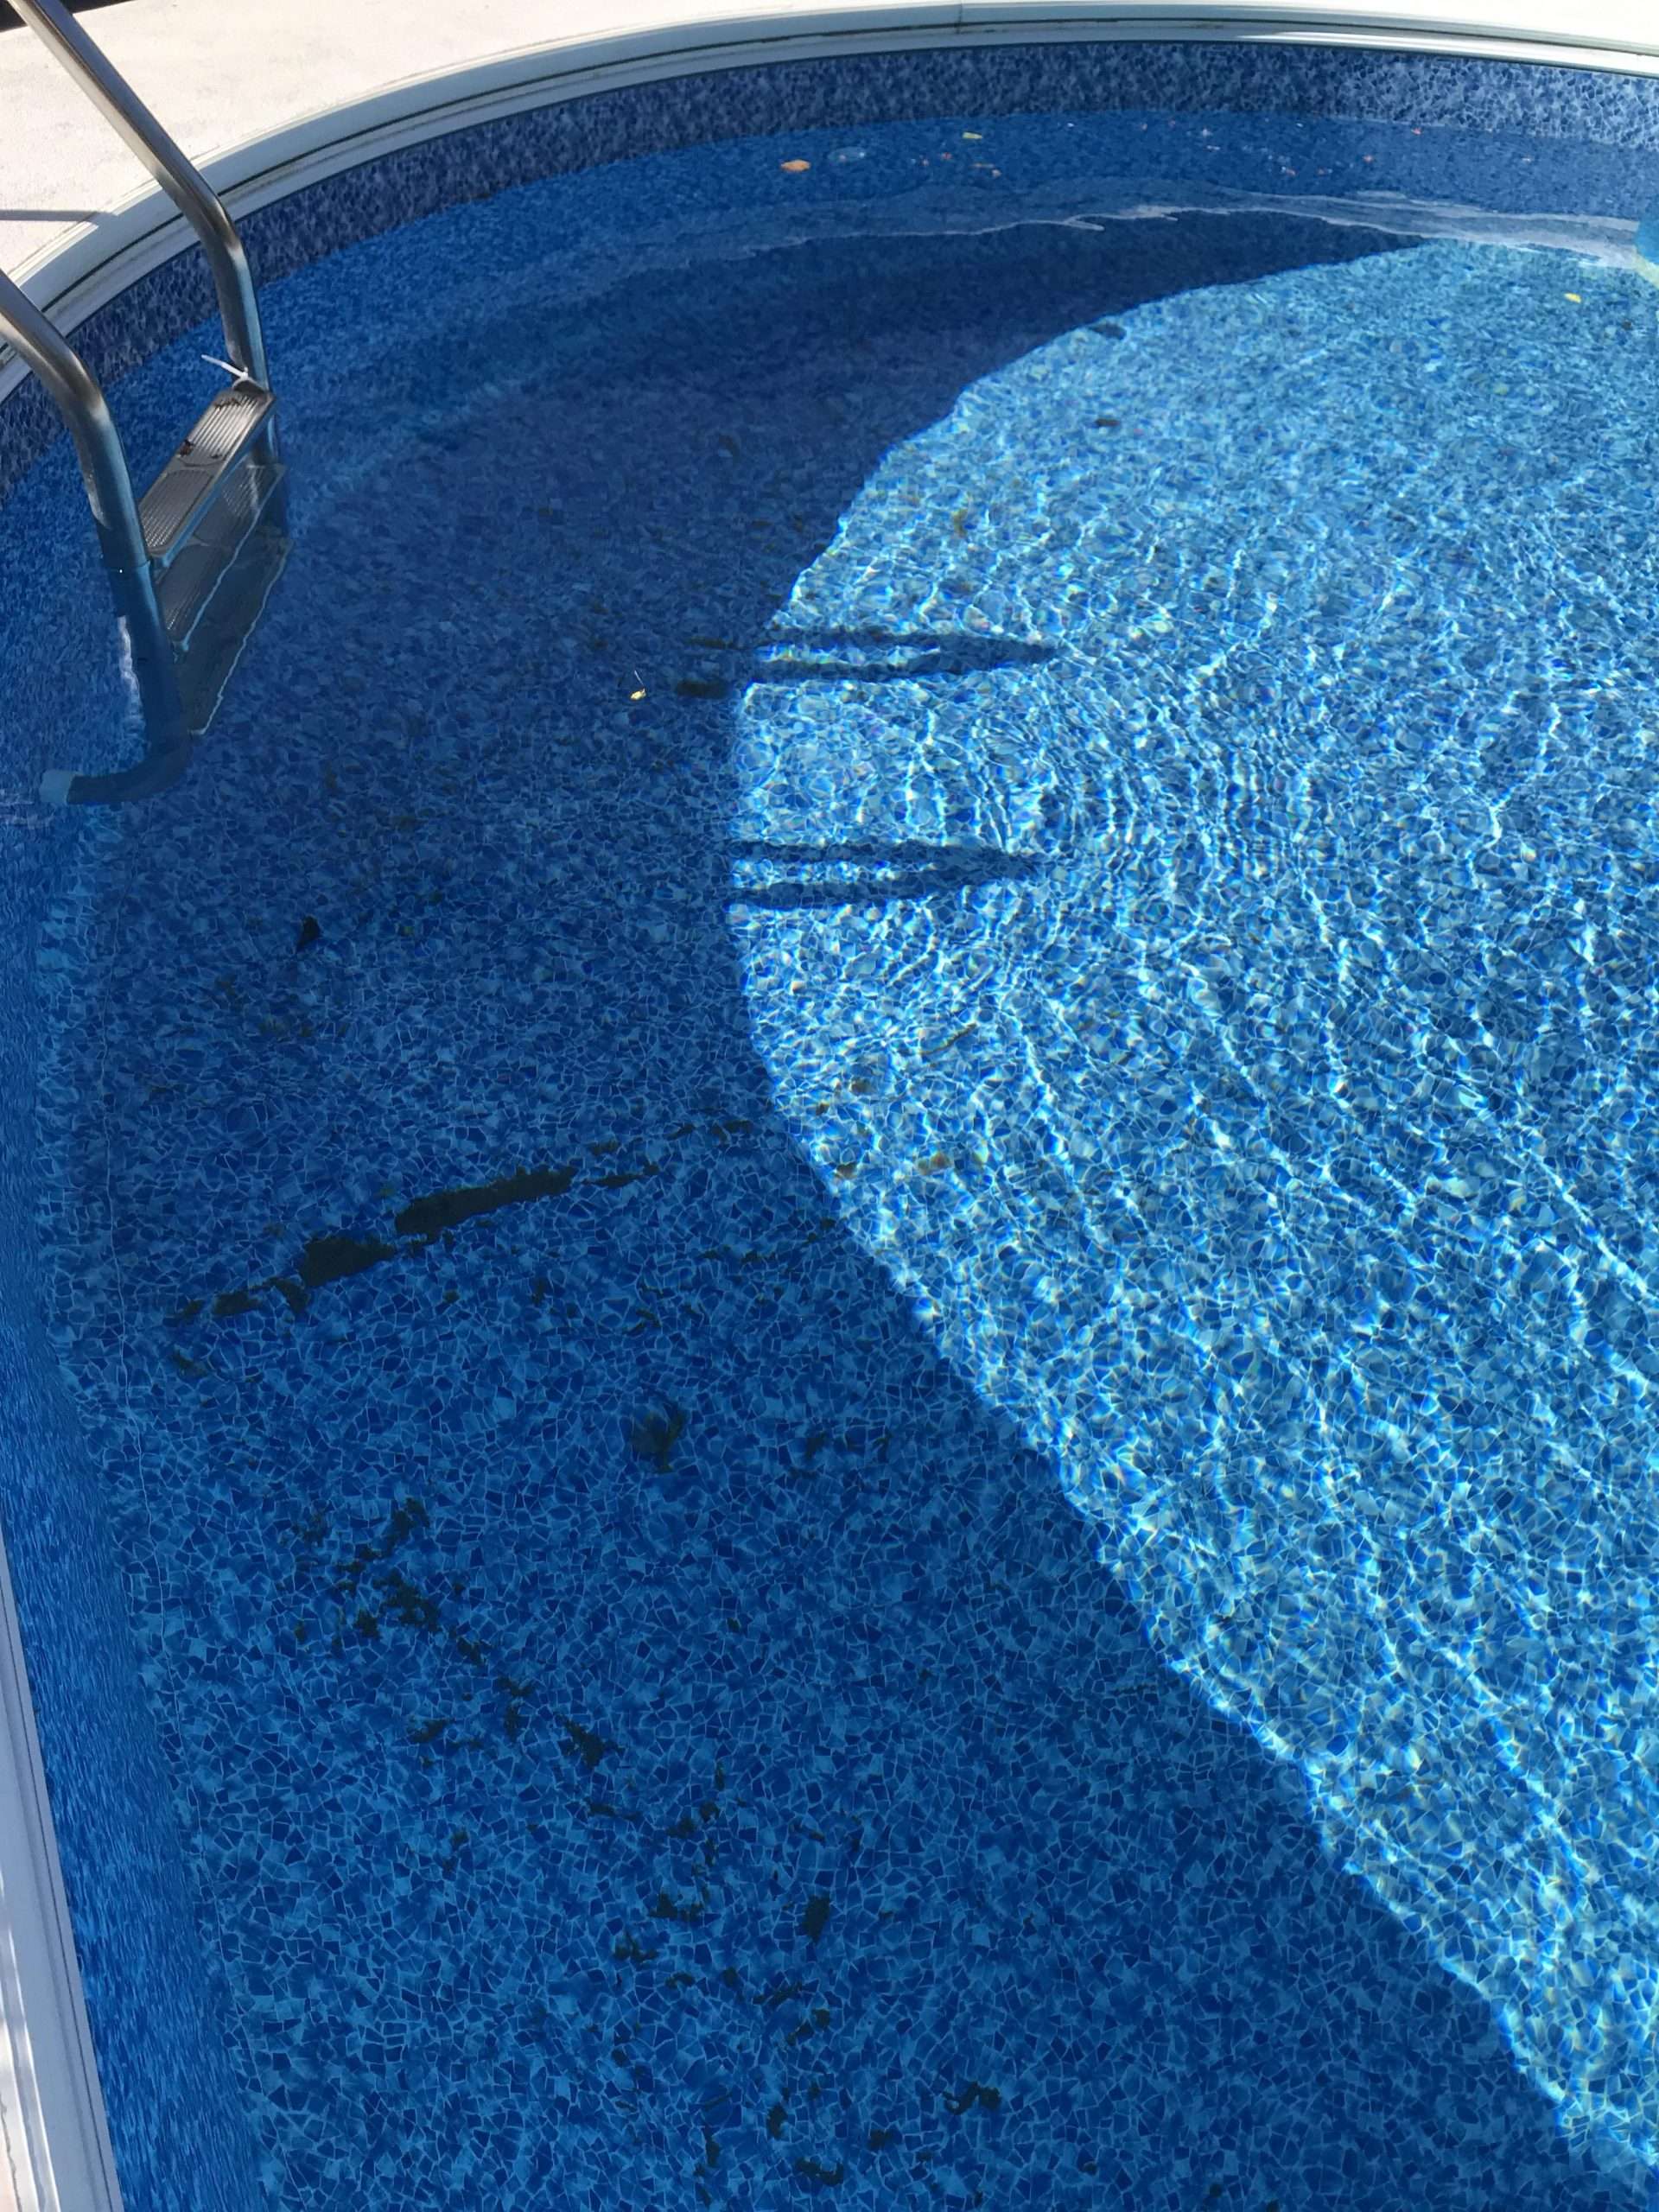 Sand in the pool. I just vacuumed and backwashed yesterday ...